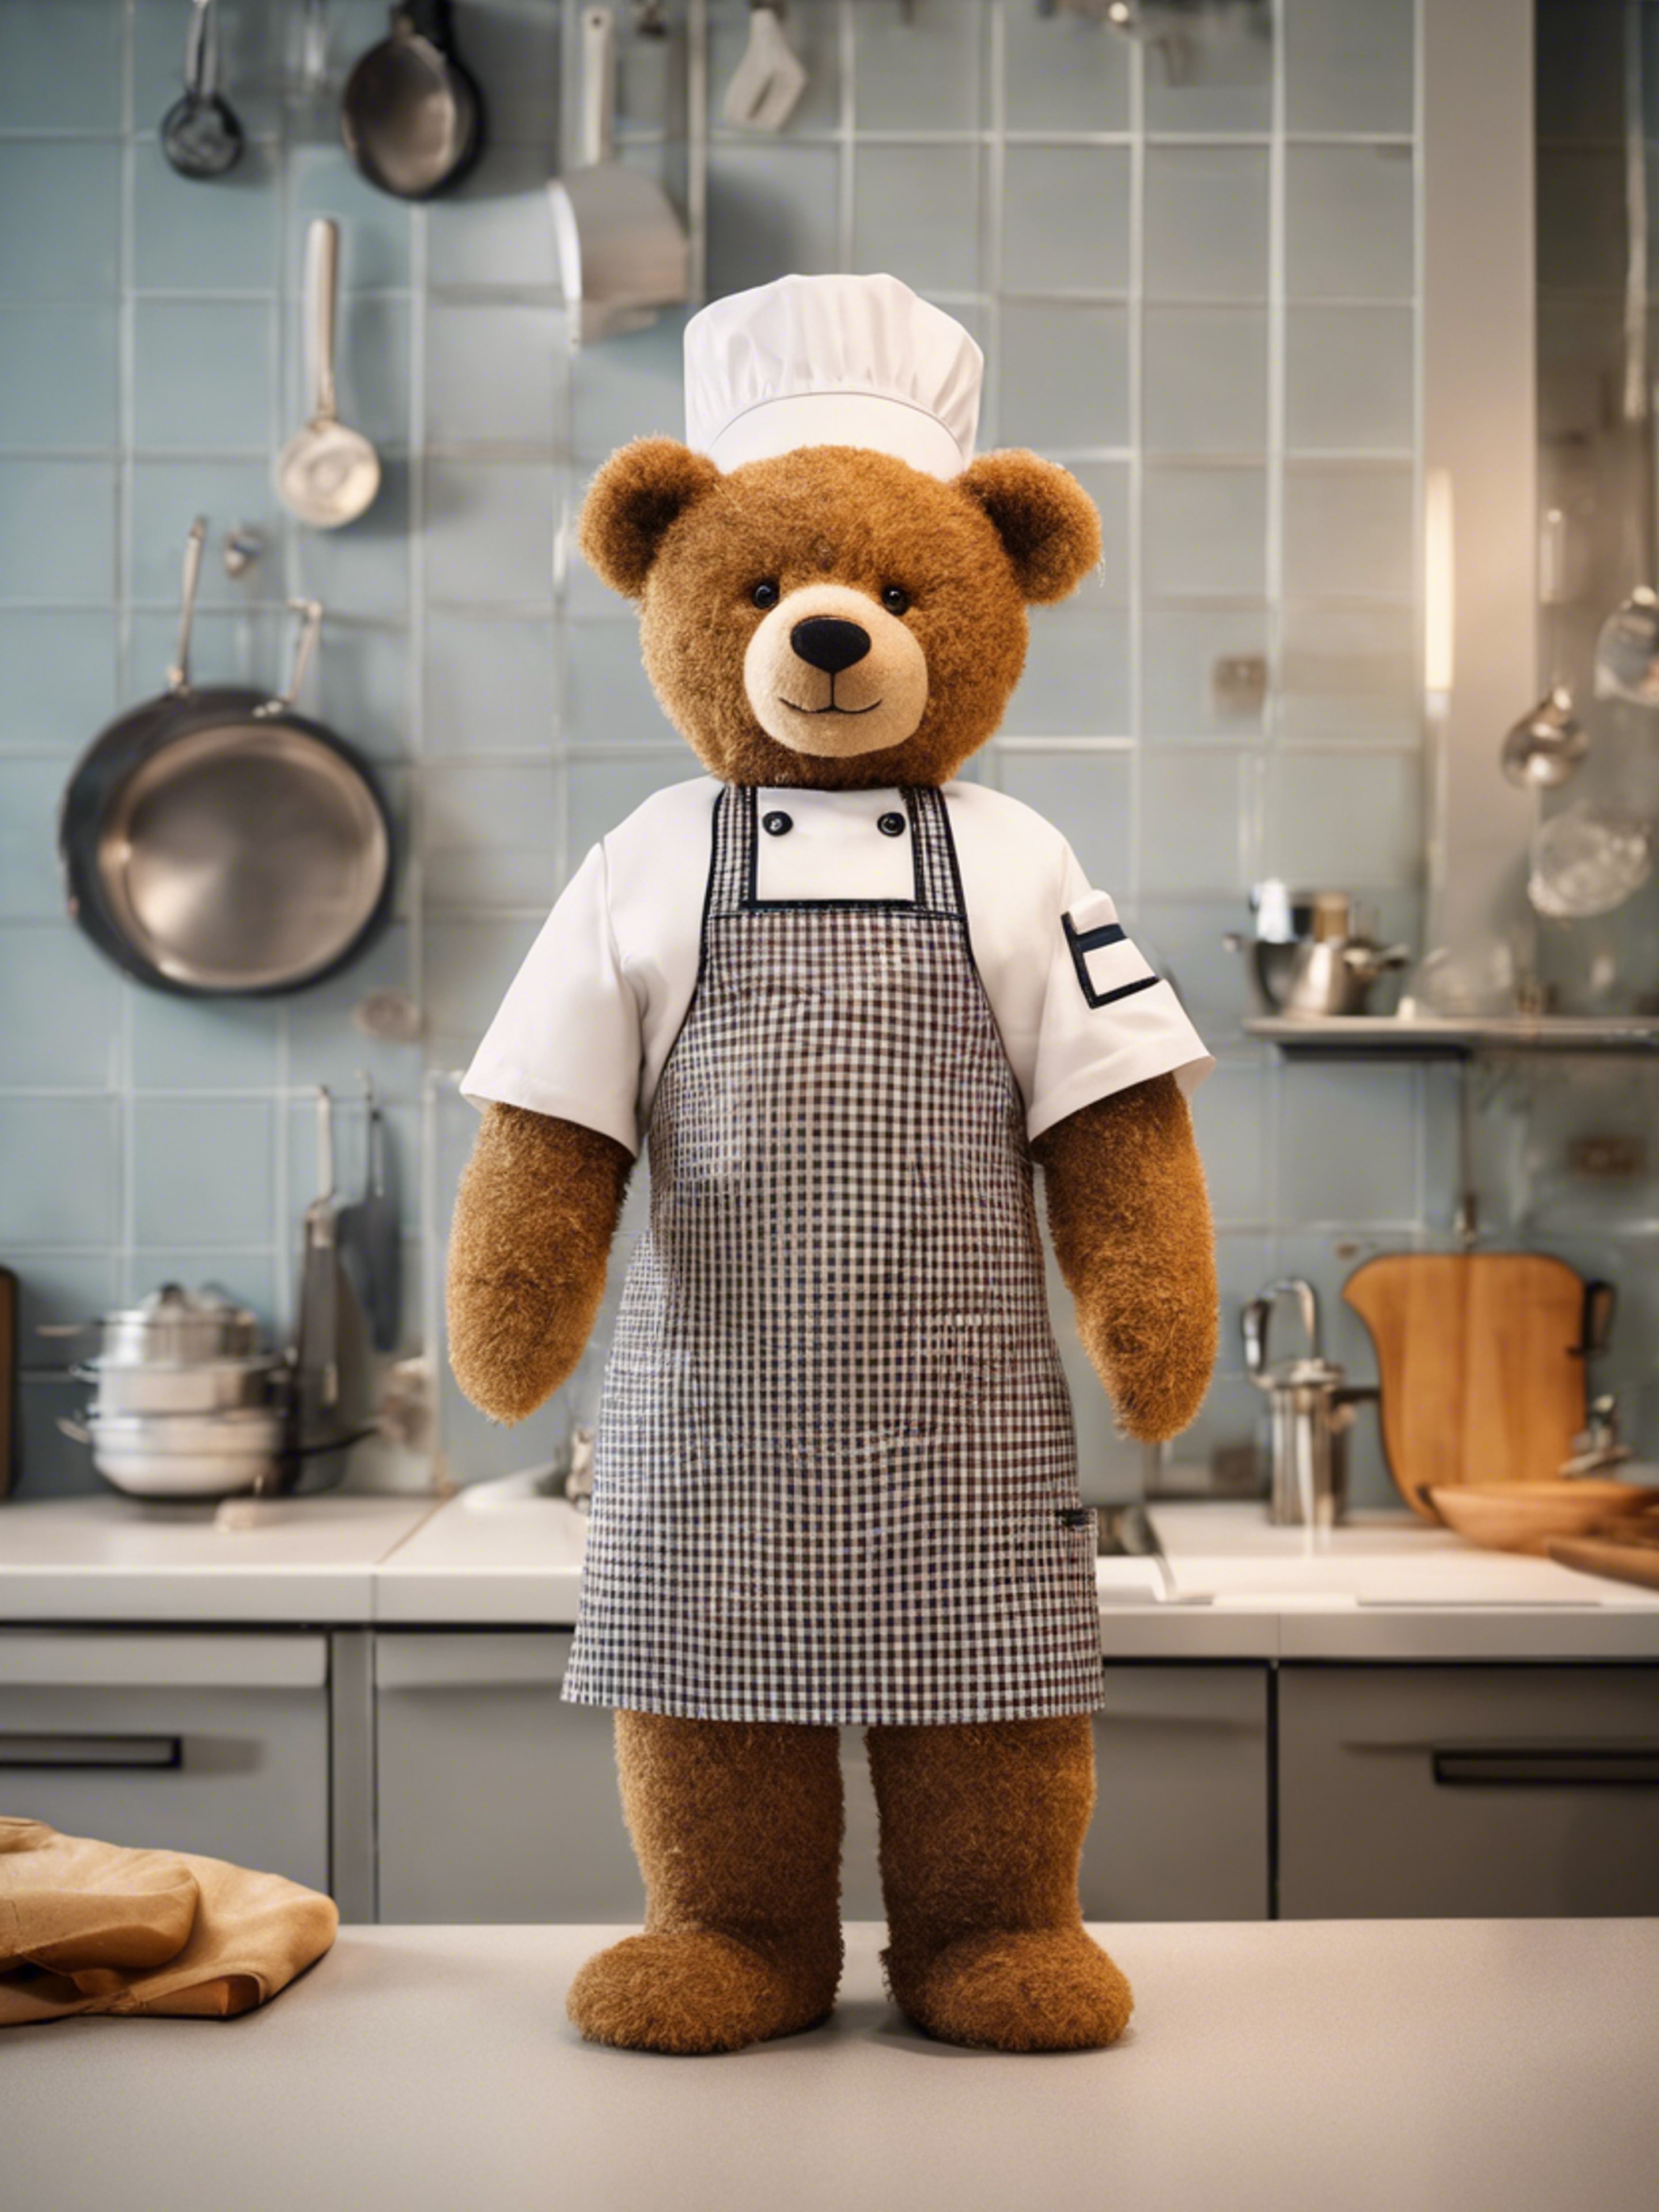 A teddy bear wearing a chef's hat and apron, standing in a kitchen.壁紙[1004f6f20387483787d7]